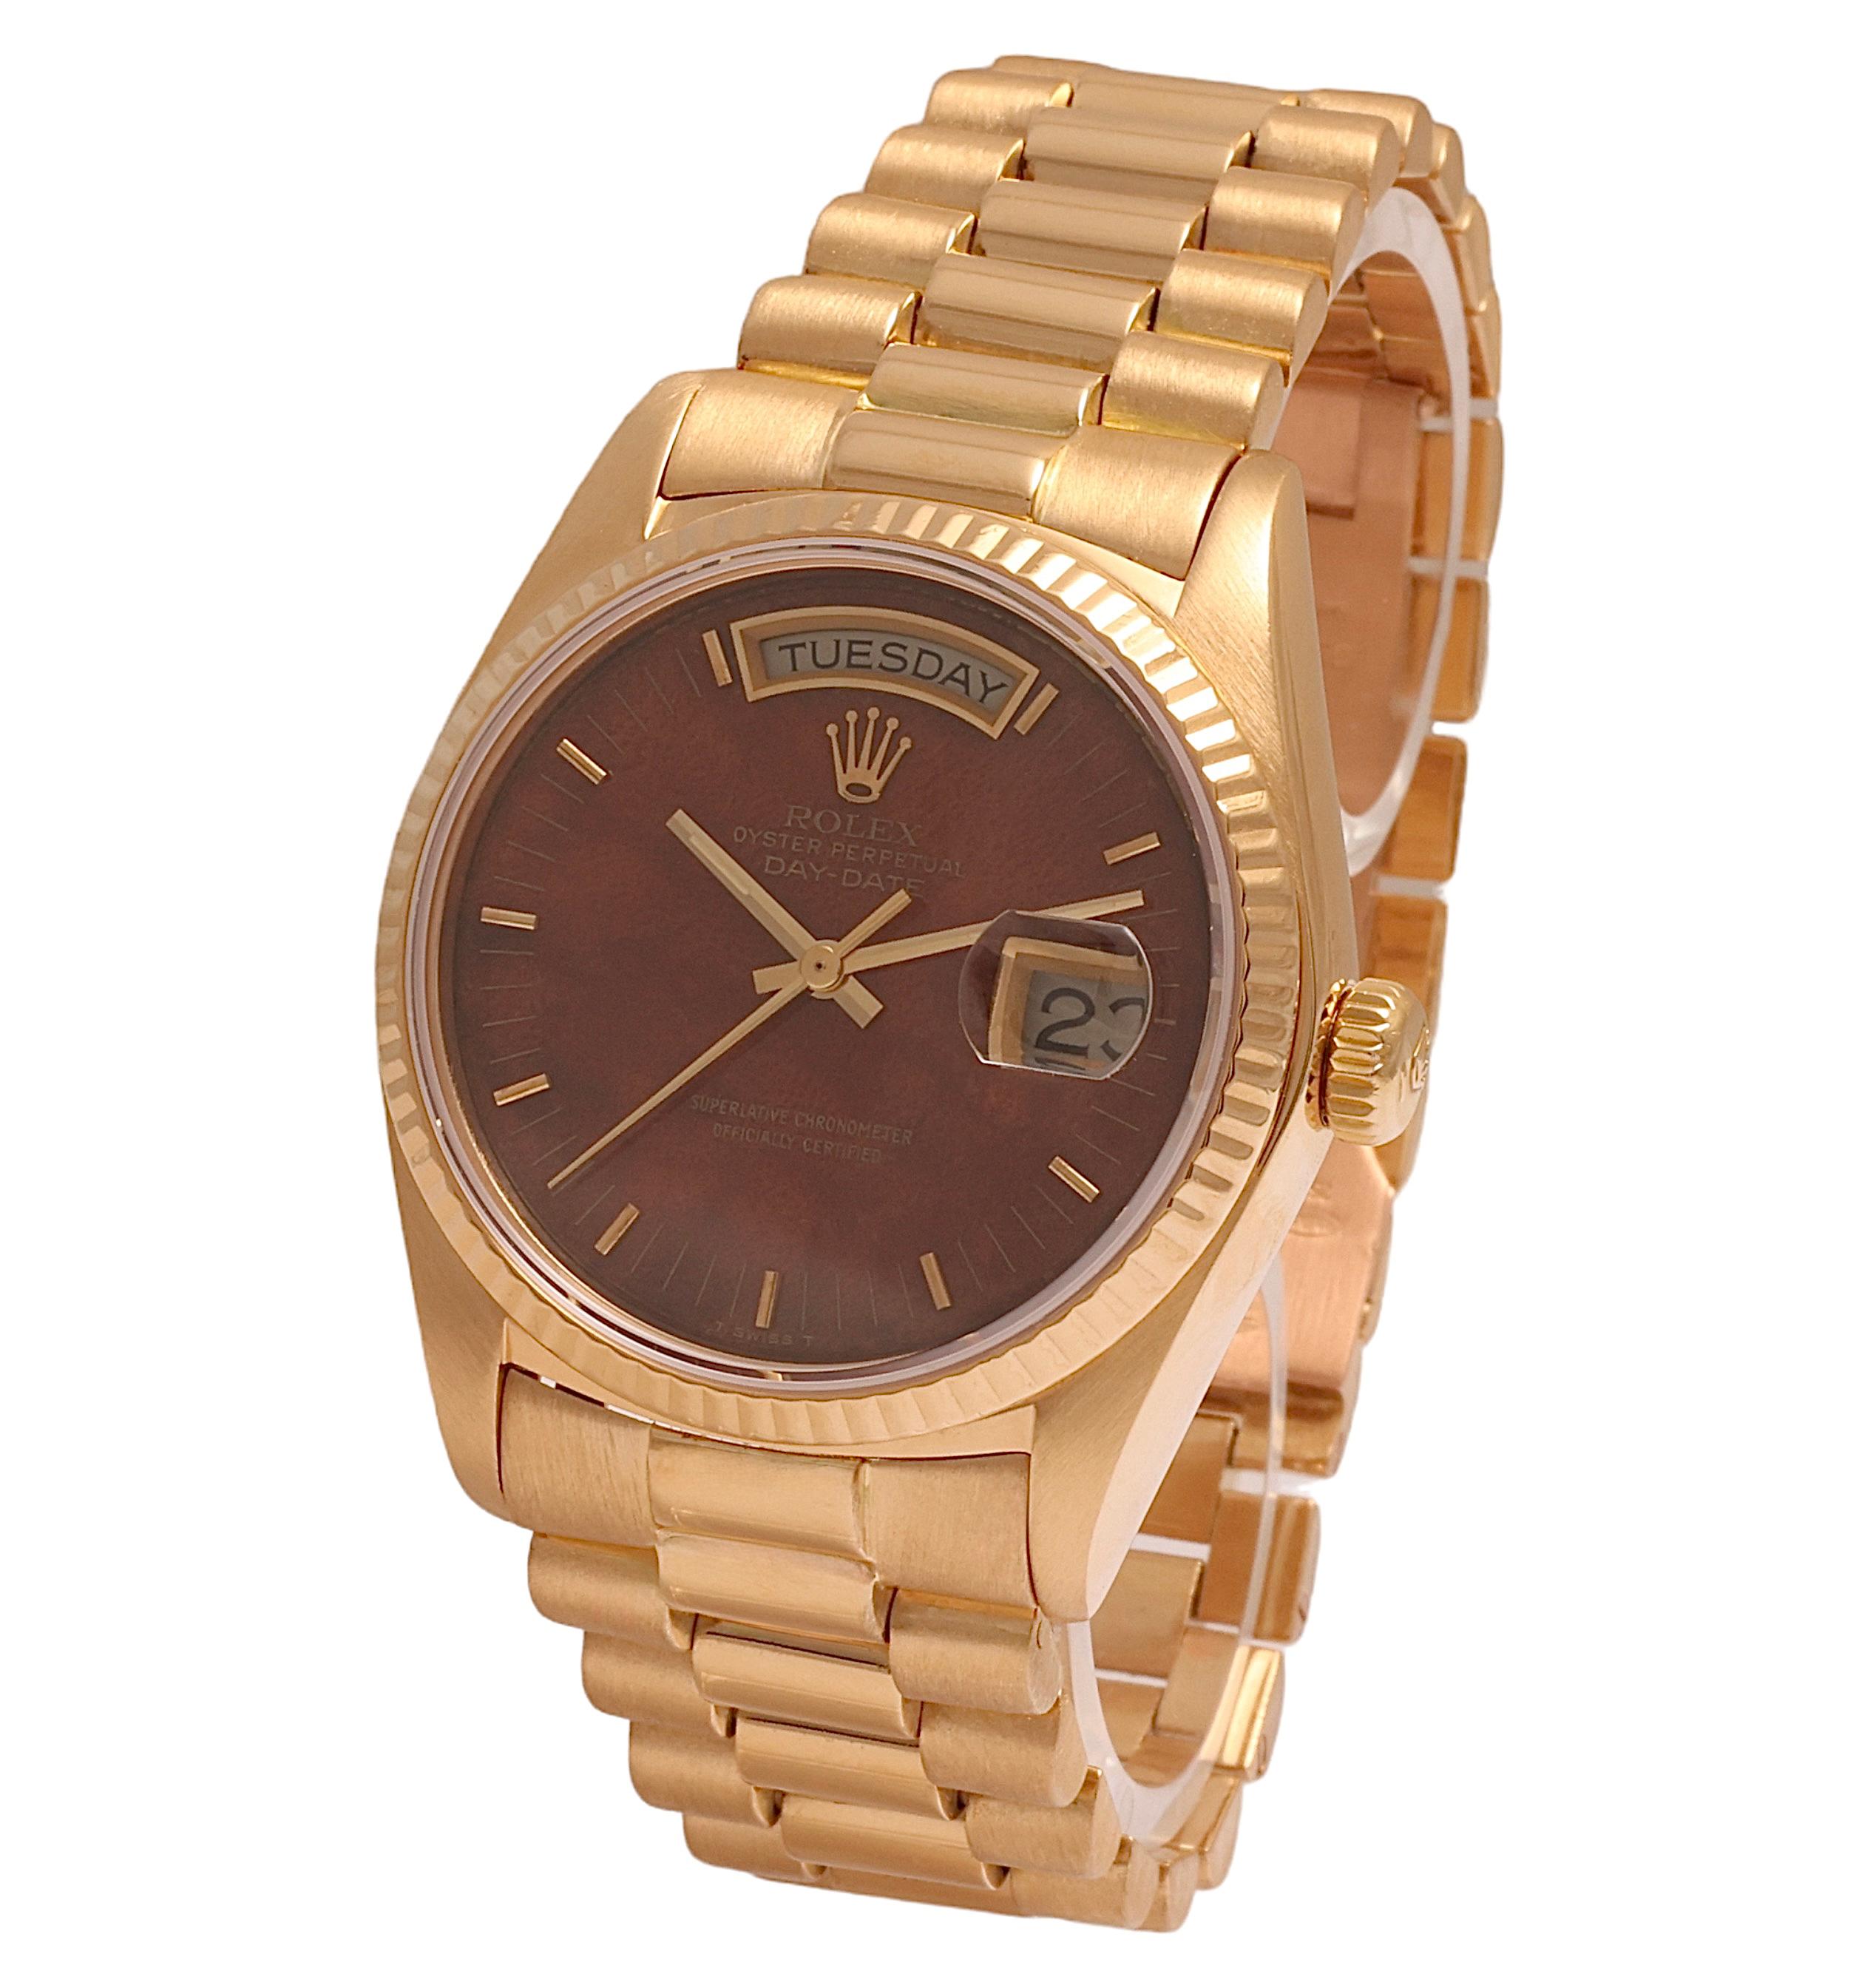 Modern 18 Kt Collectors Rolex President Wood Dial, Ref 18038 from 1978 For Sale